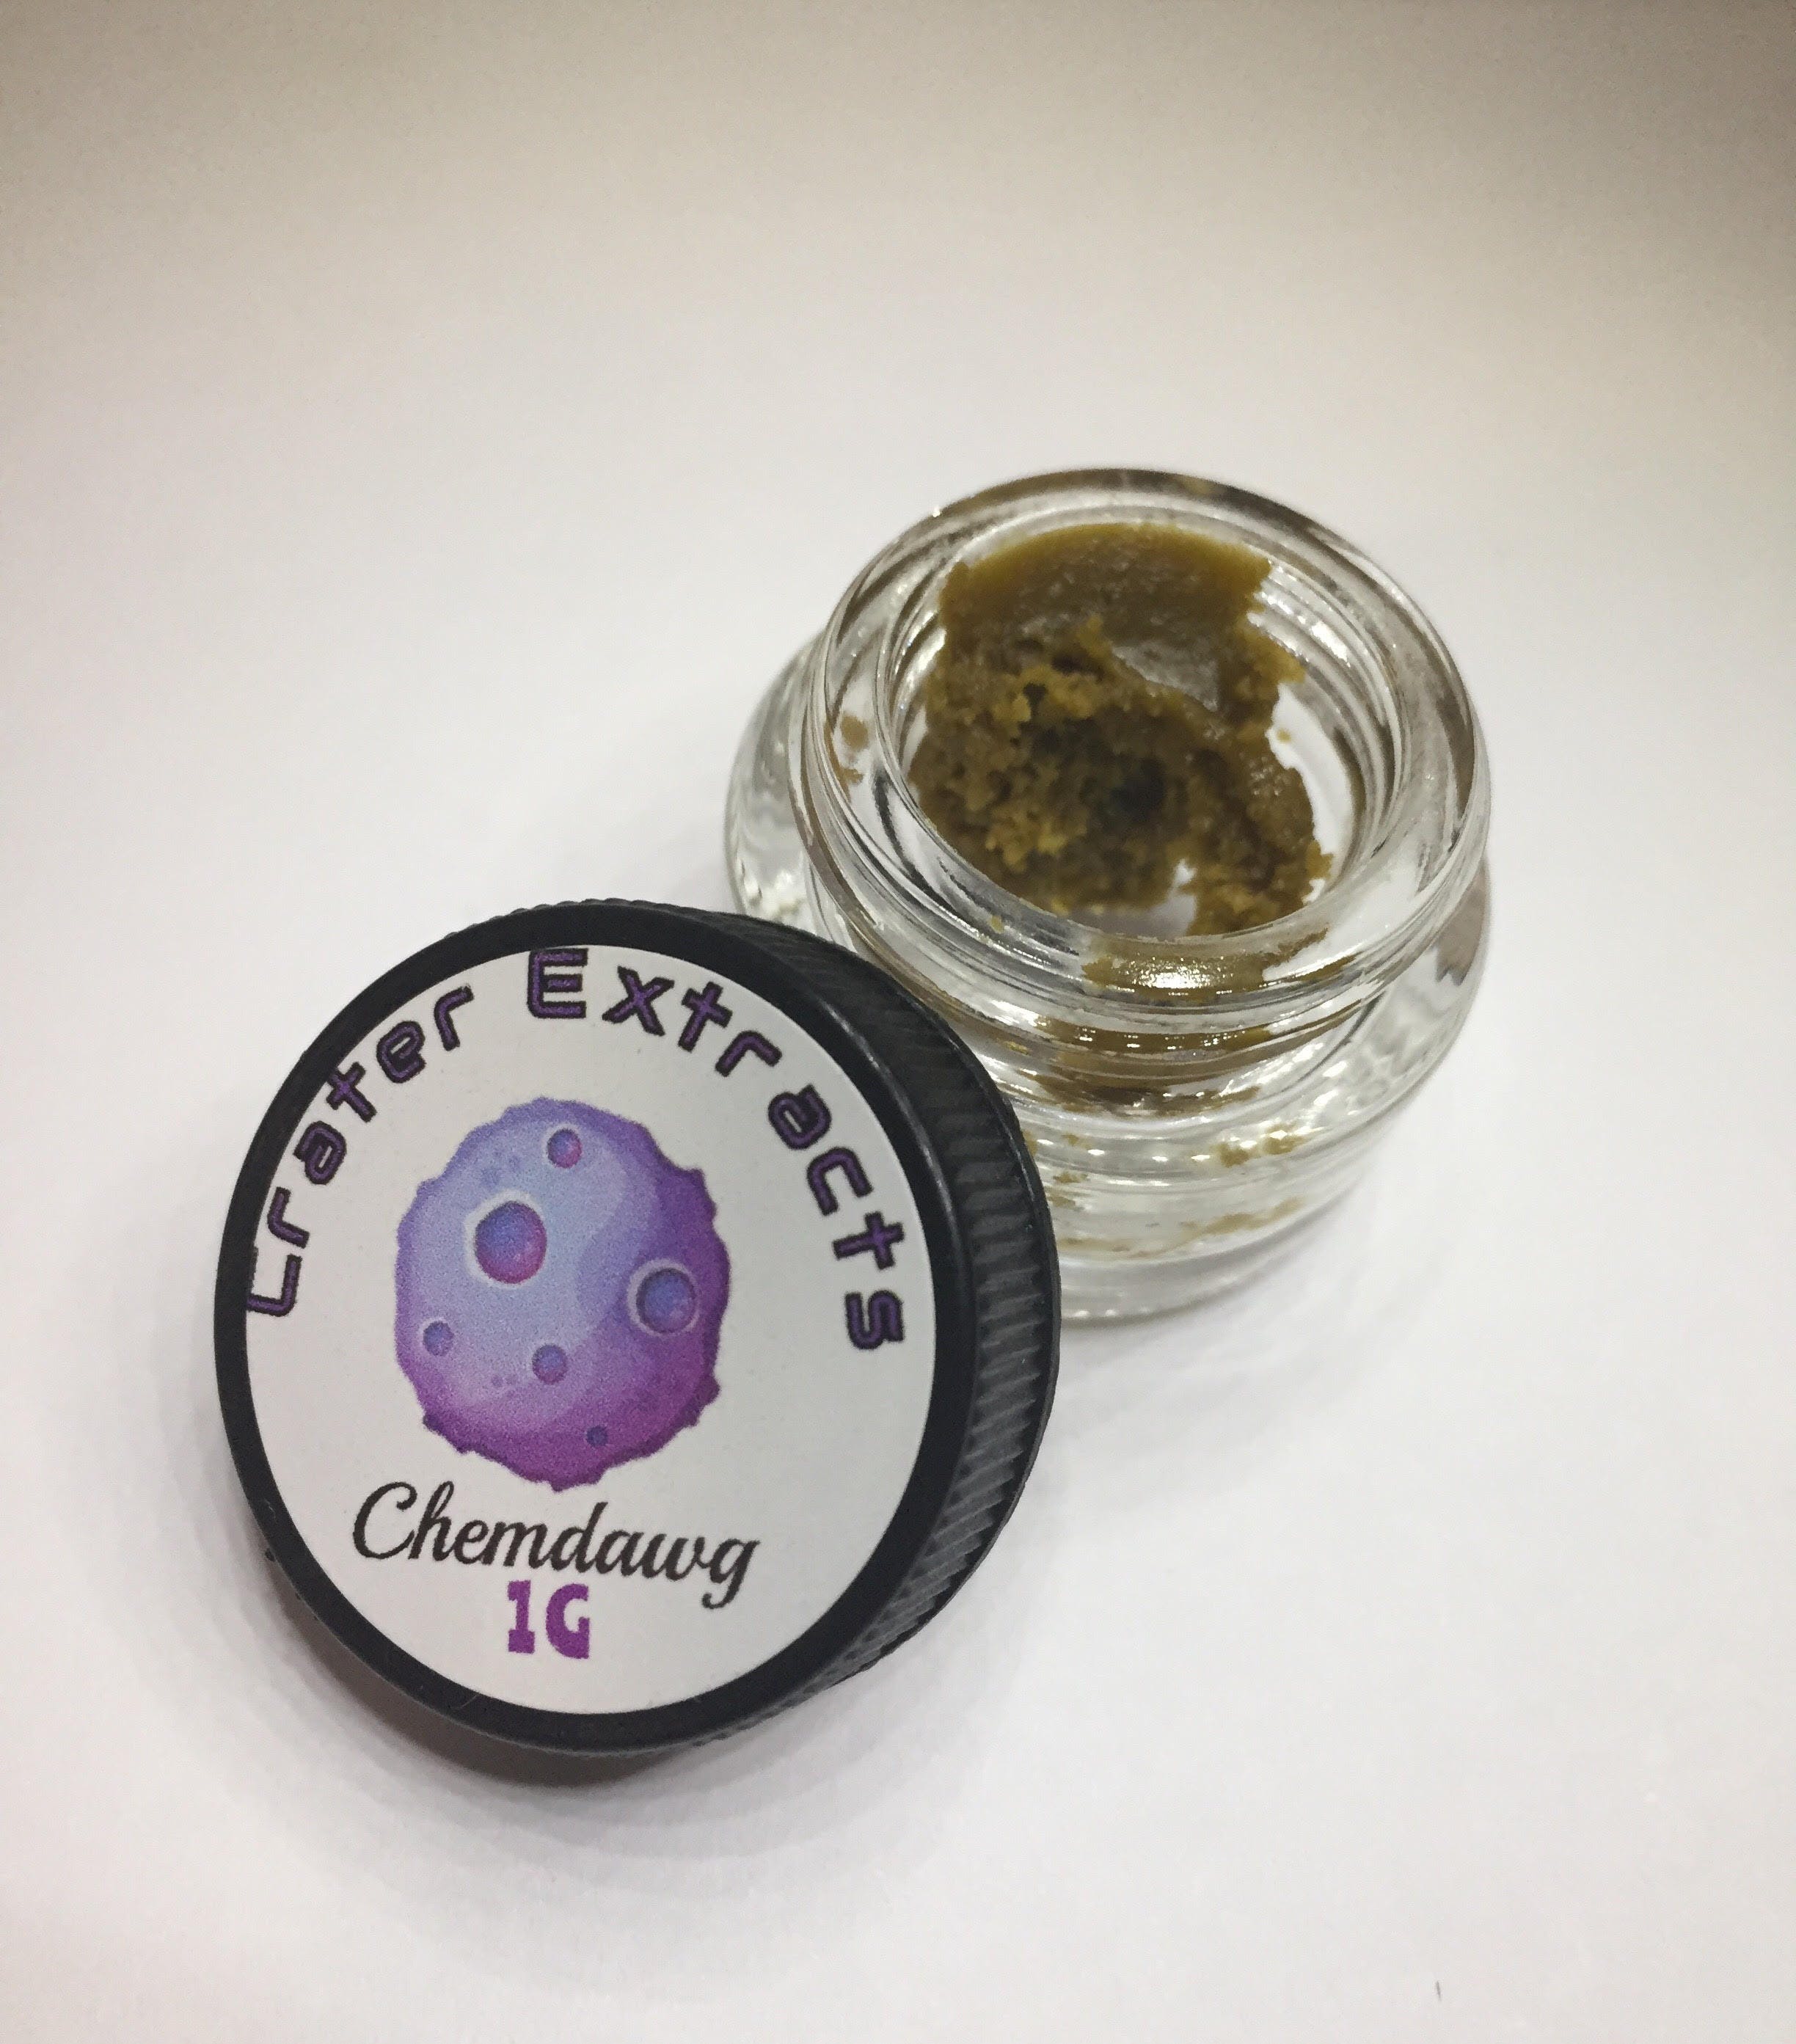 wax-crater-extracts-chemdawg